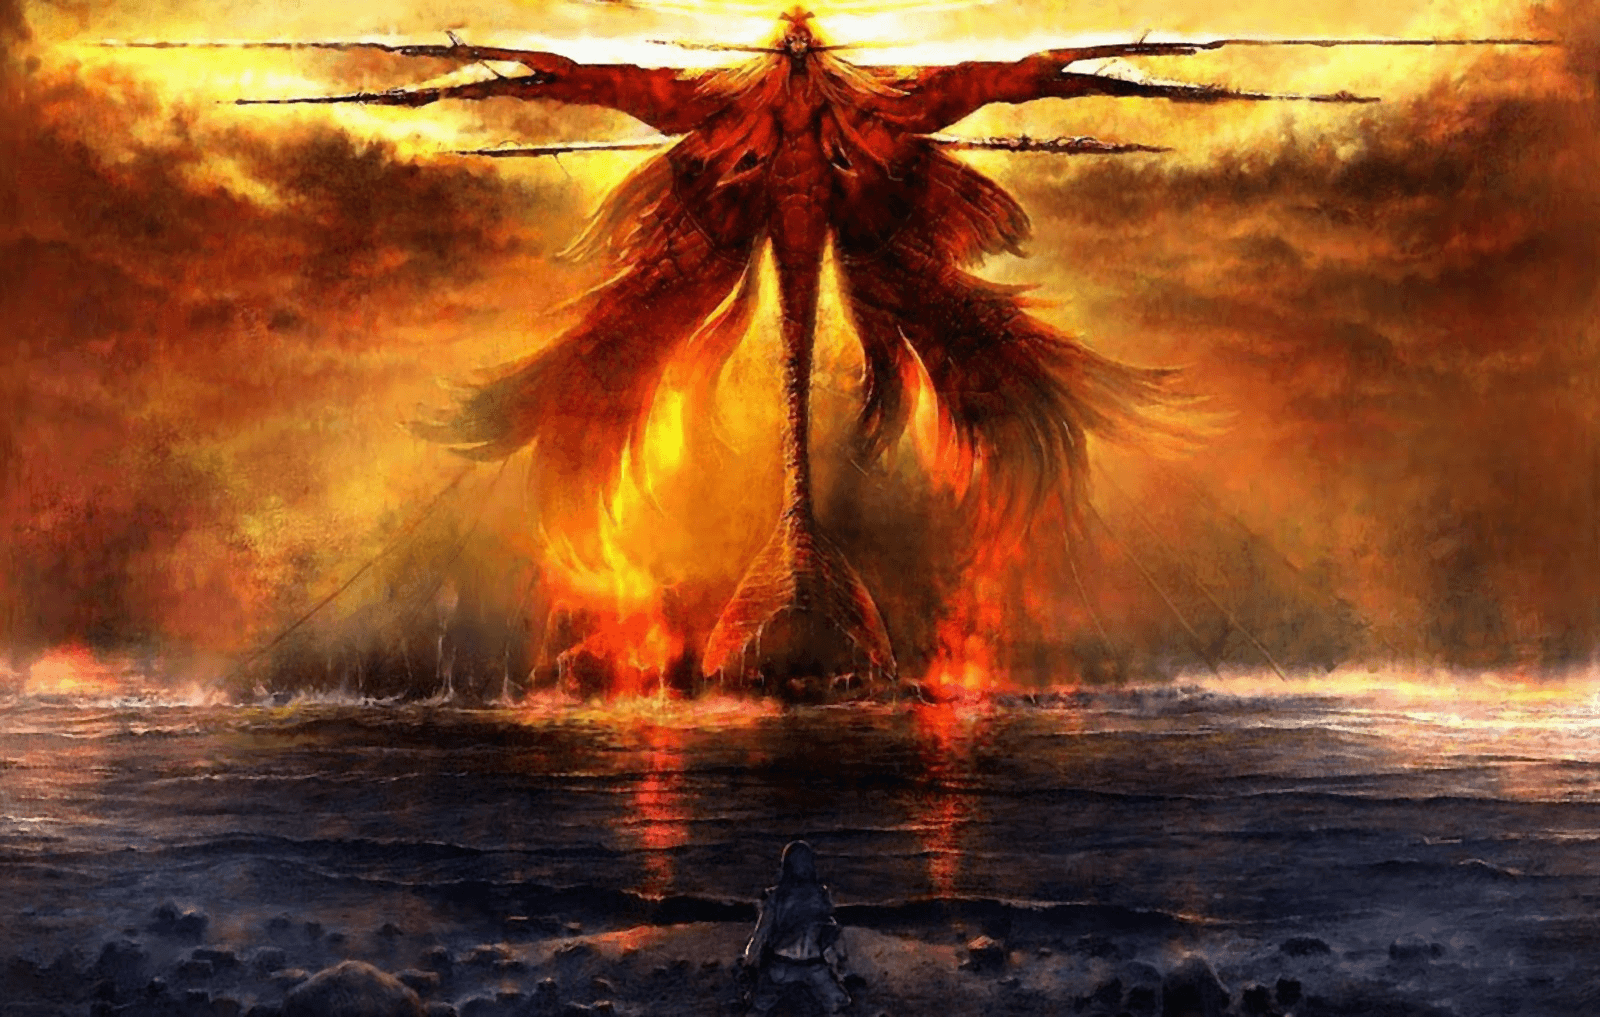 Dragons And Phoenix Rising From Ashes Wallpapers Wallpaper Cave 1524